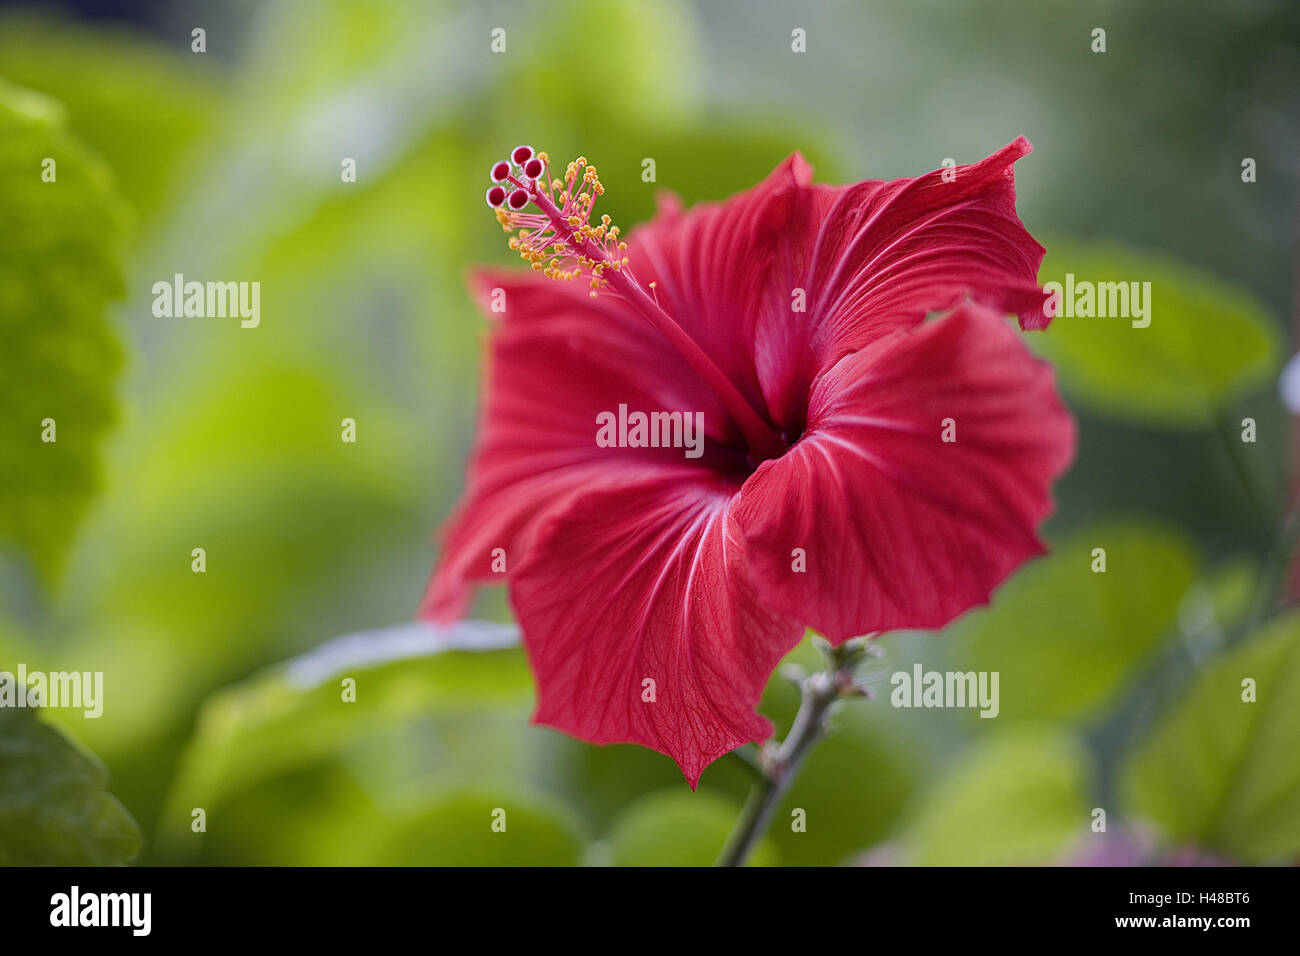 Hibiscus, blossom, red, medium close-up, hibiscus blossom, dust vessels, blossom, radiant, red, exotic, ornamental plant, calyx, flower, botany, flora, nature, plant, vegetation, flower temple, marsh mallow, mallow plant, dust leaves, Stock Photo